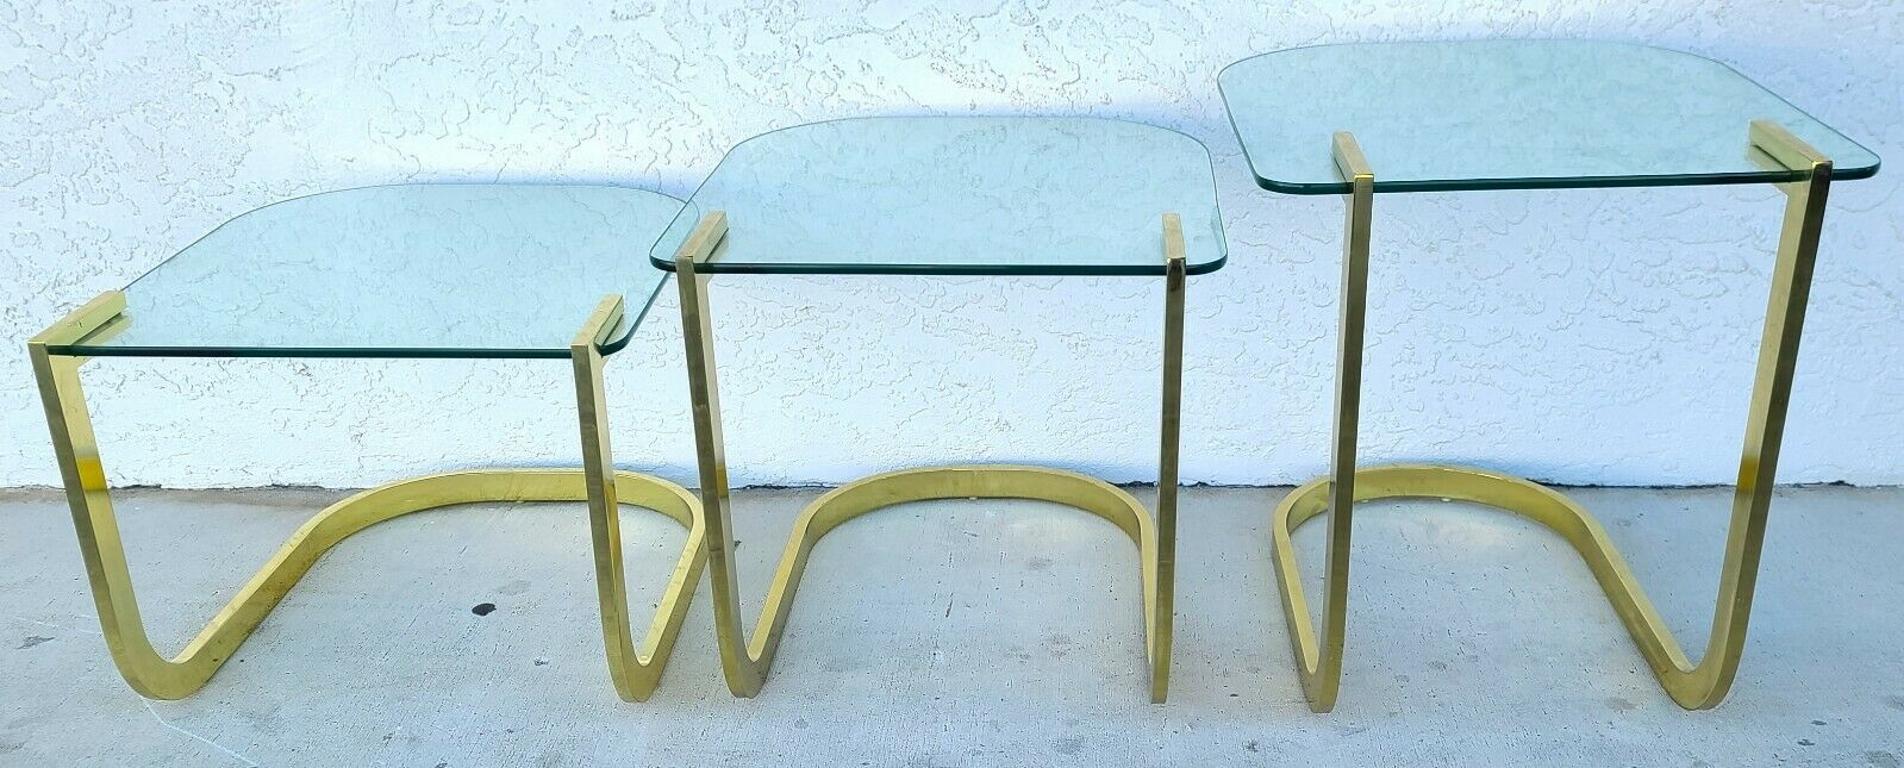 1970's MCM Nesting Tables by Design Institute of America In Good Condition For Sale In Lake Worth, FL